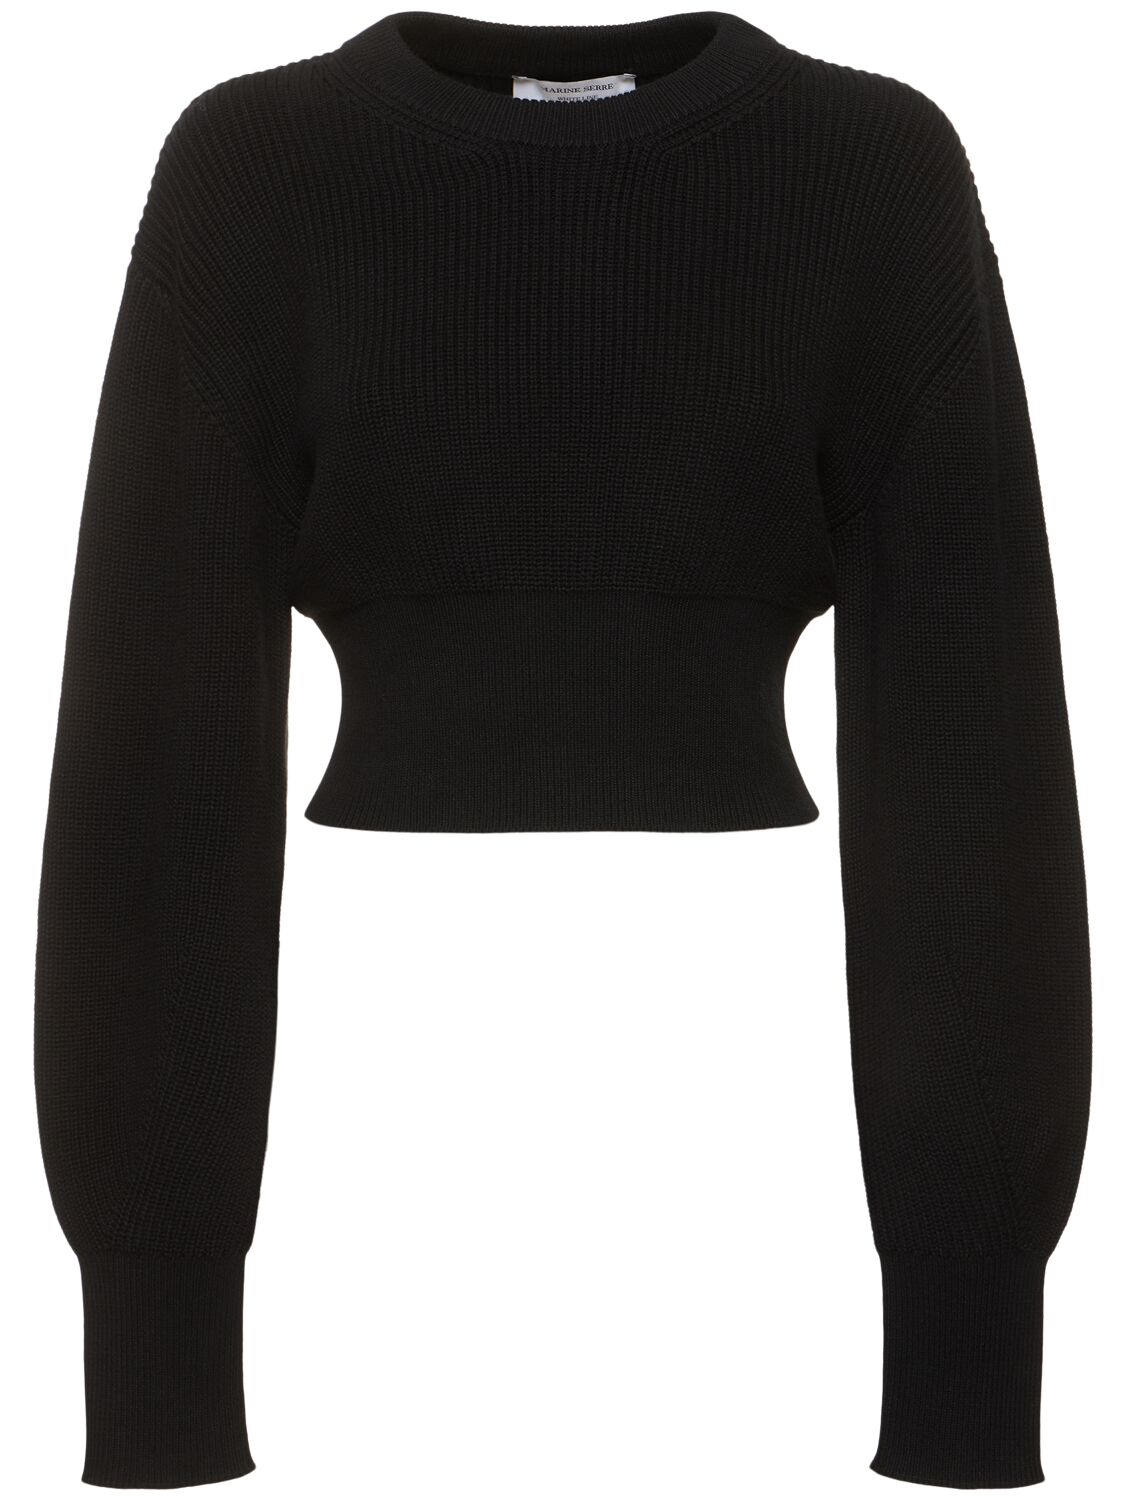 Image of Knit Crewneck Cropped Sweater